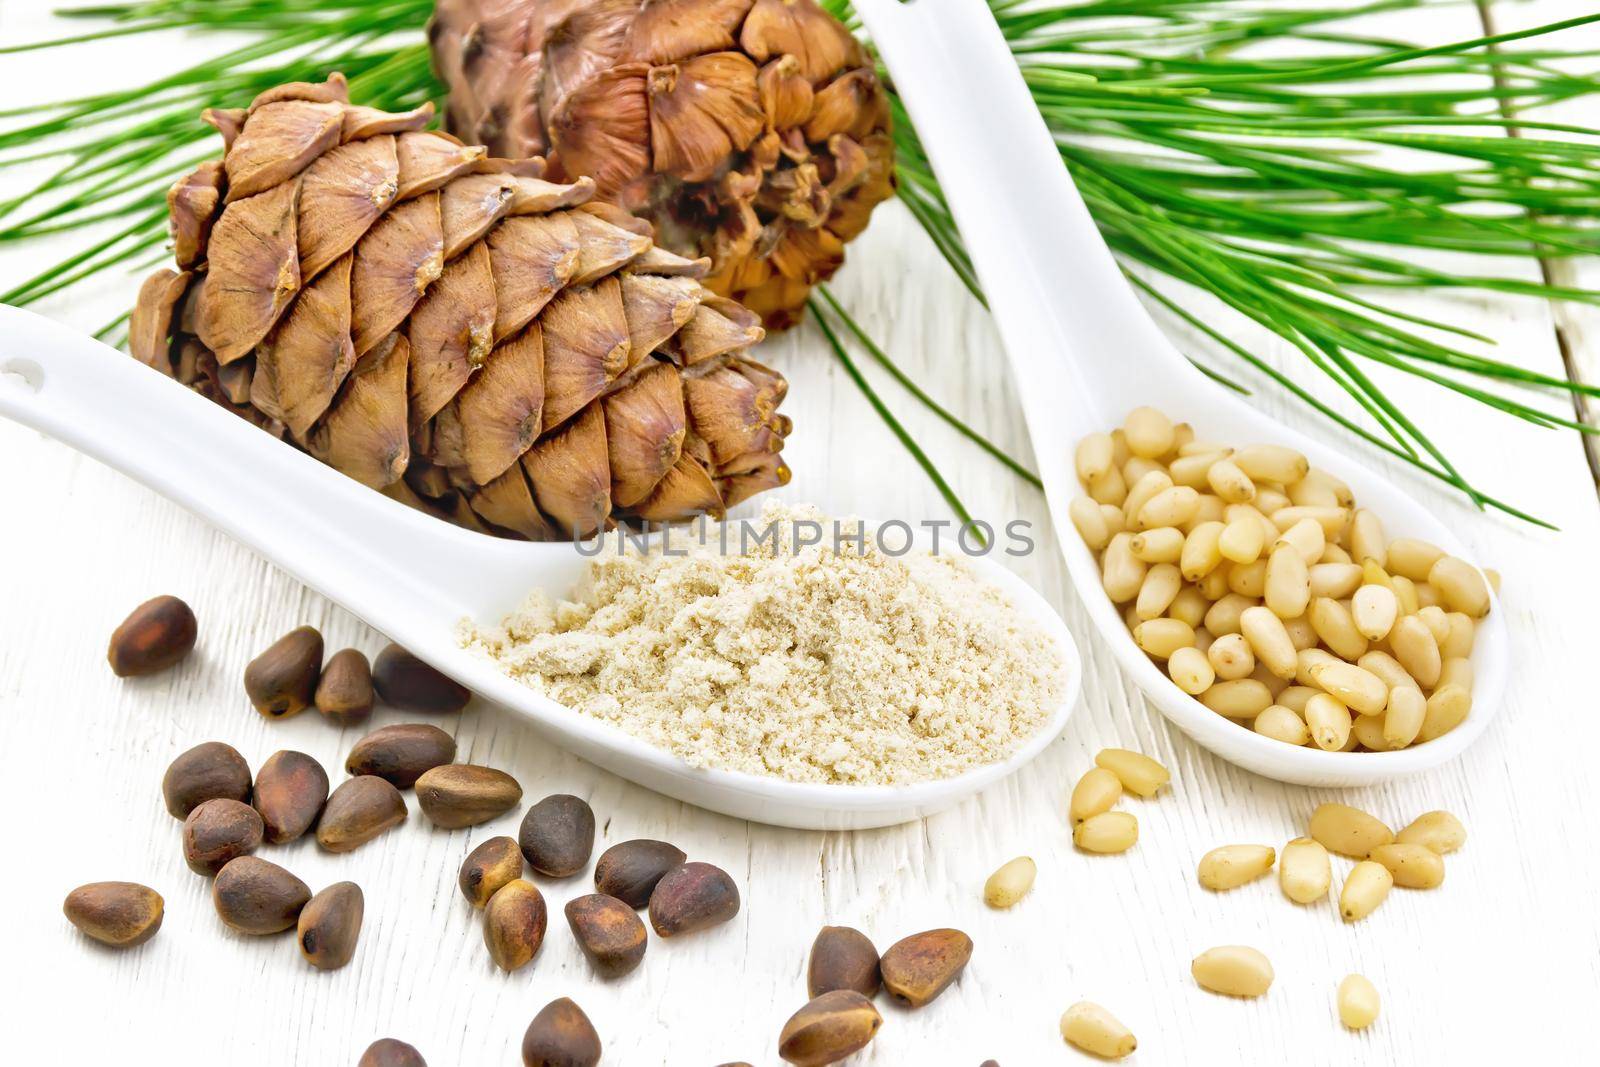 Cedar flour and peeled nuts in two spoons, two cones, a green cedar branch on background of a light wooden board